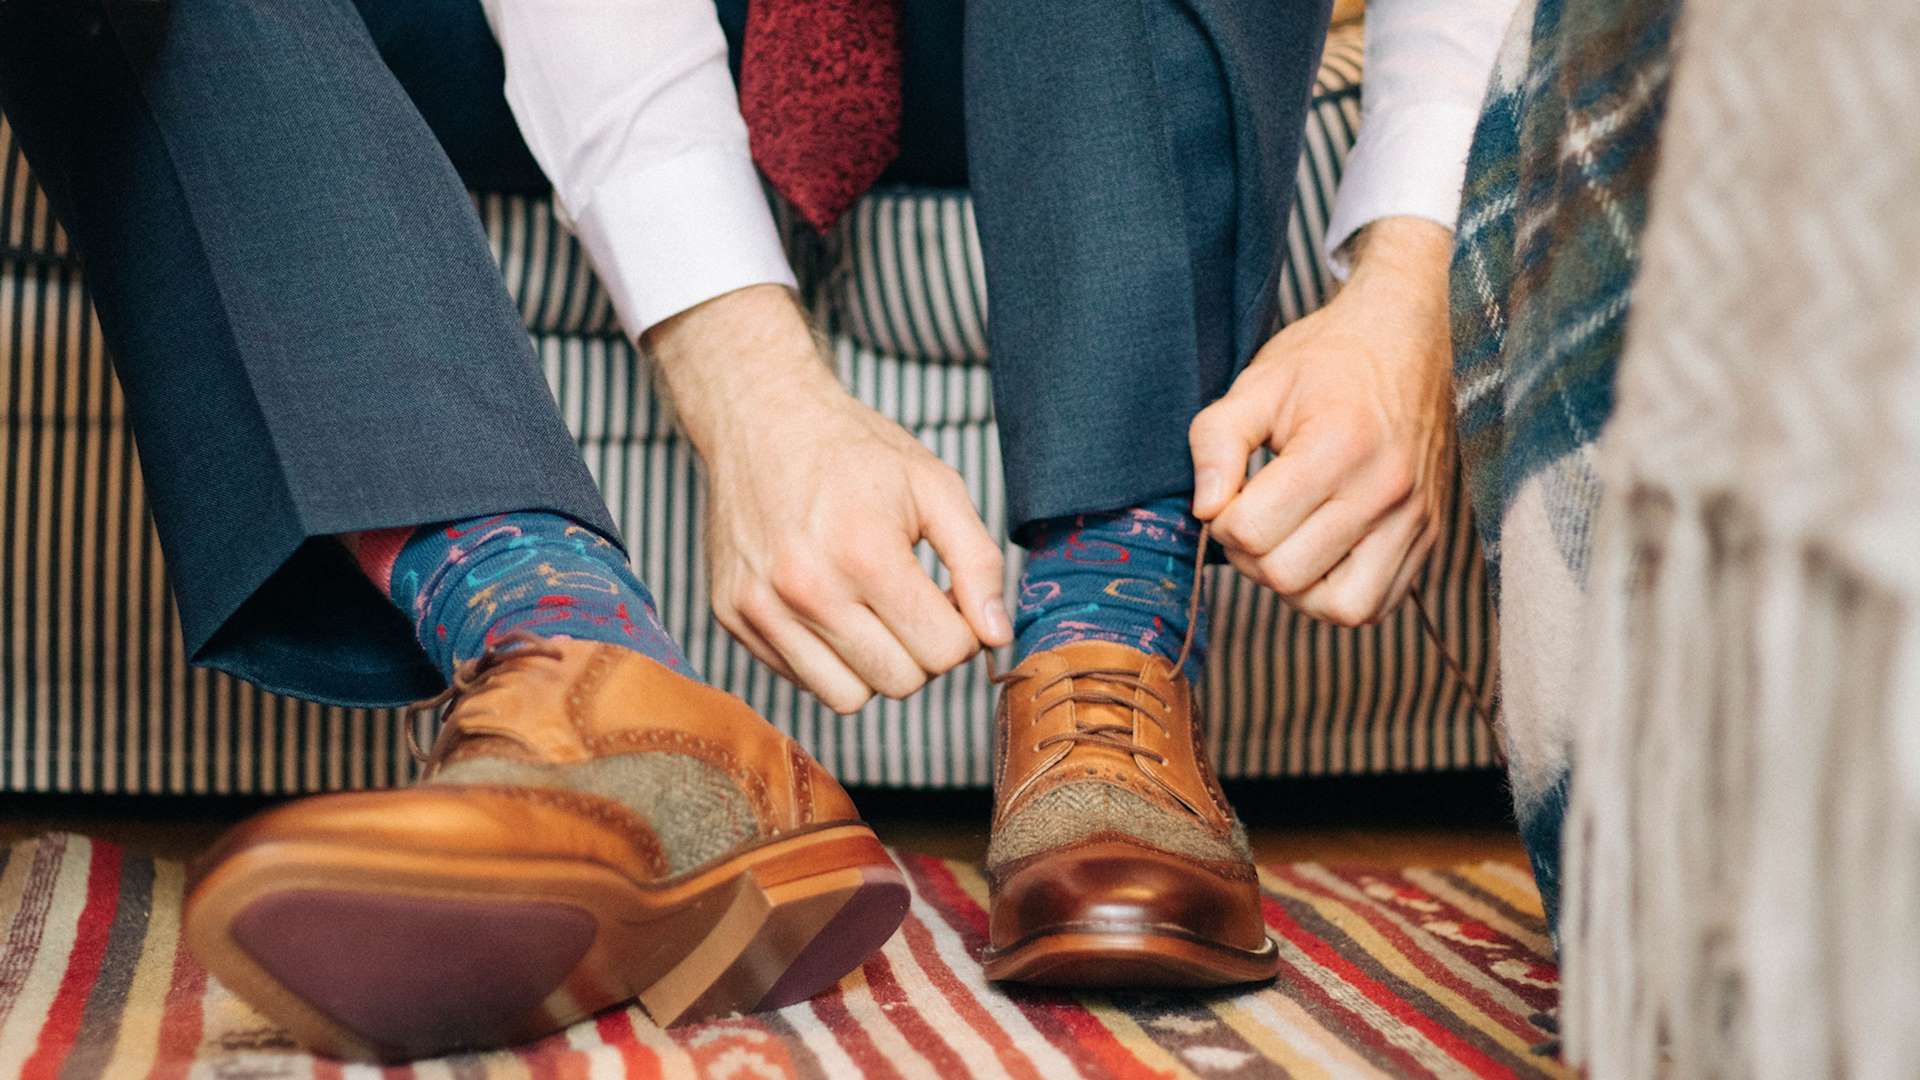 Mens Wedding Shoes Style Guide: The 21 Best Ideas